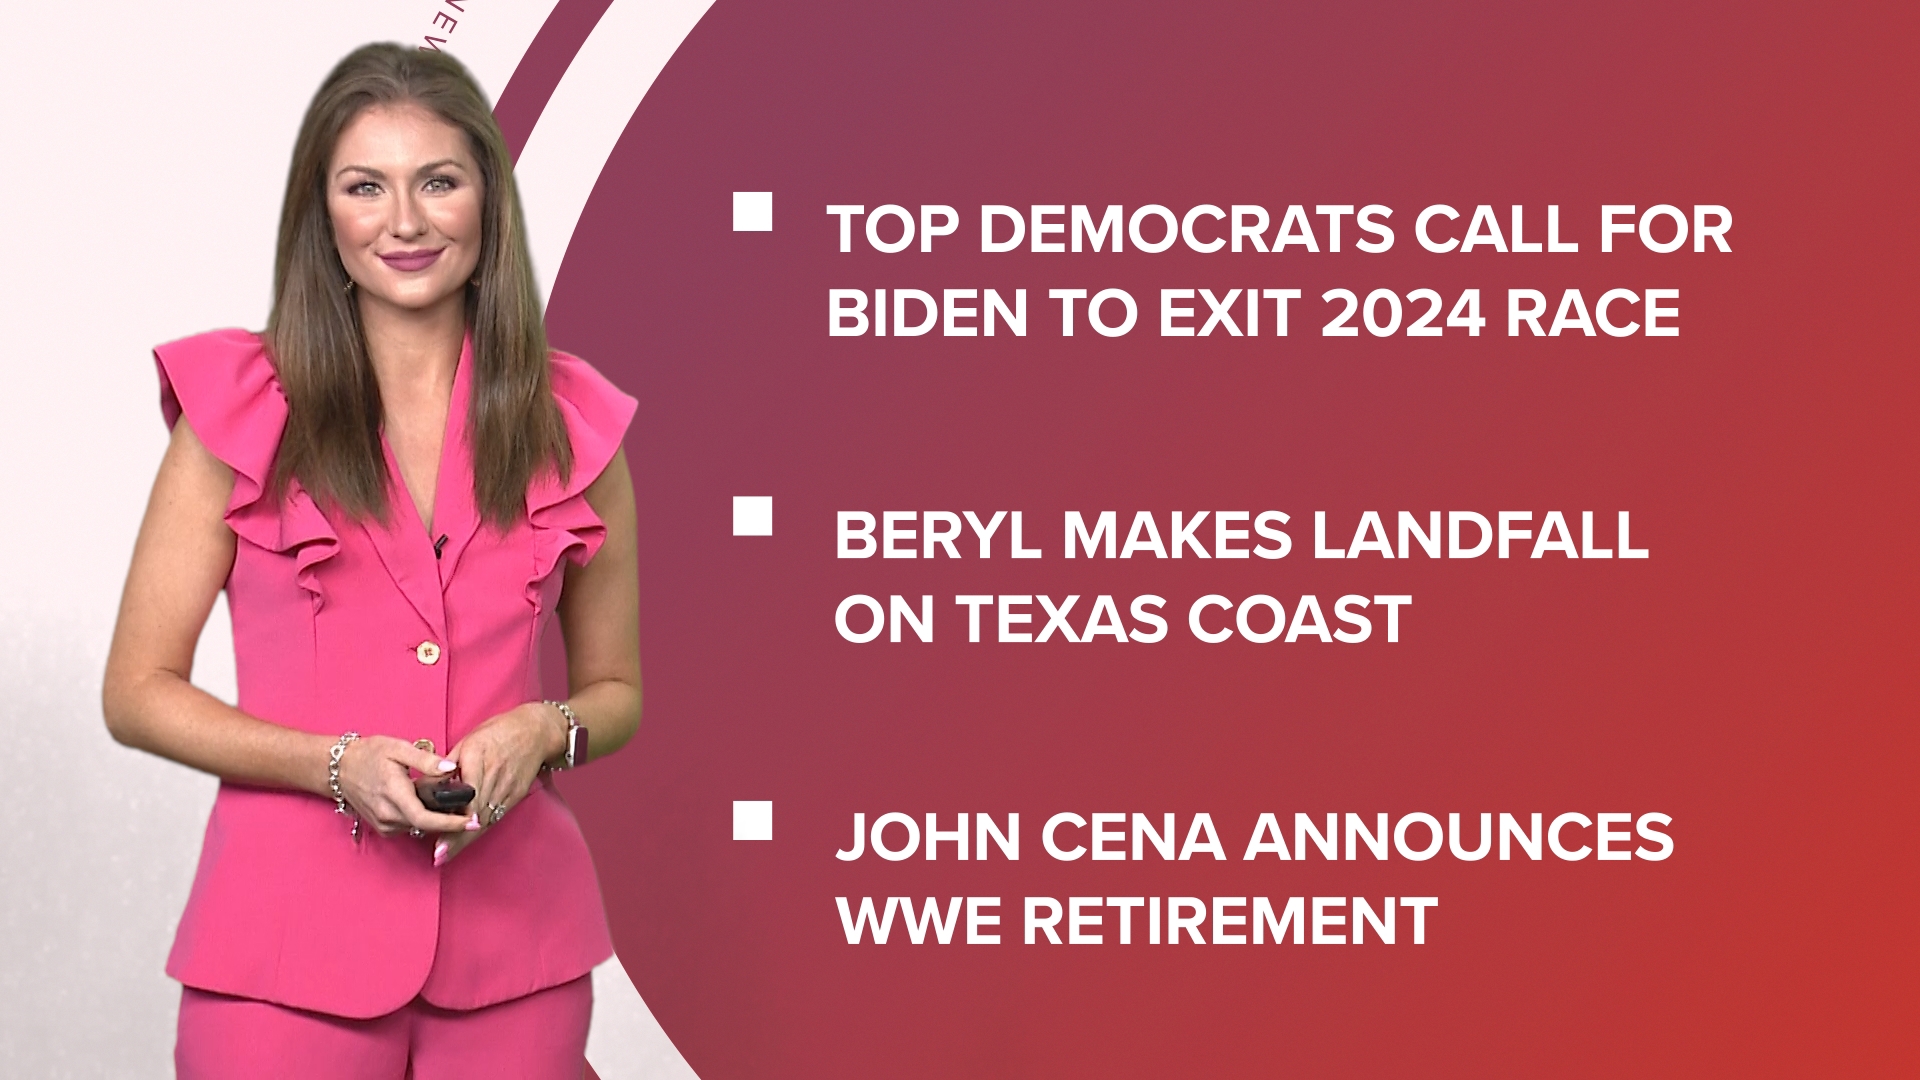 A look at what is happening in the news from Hurricane Beryl makes landfall in Texas to wildfires in California and John Cena to retire from WWE.